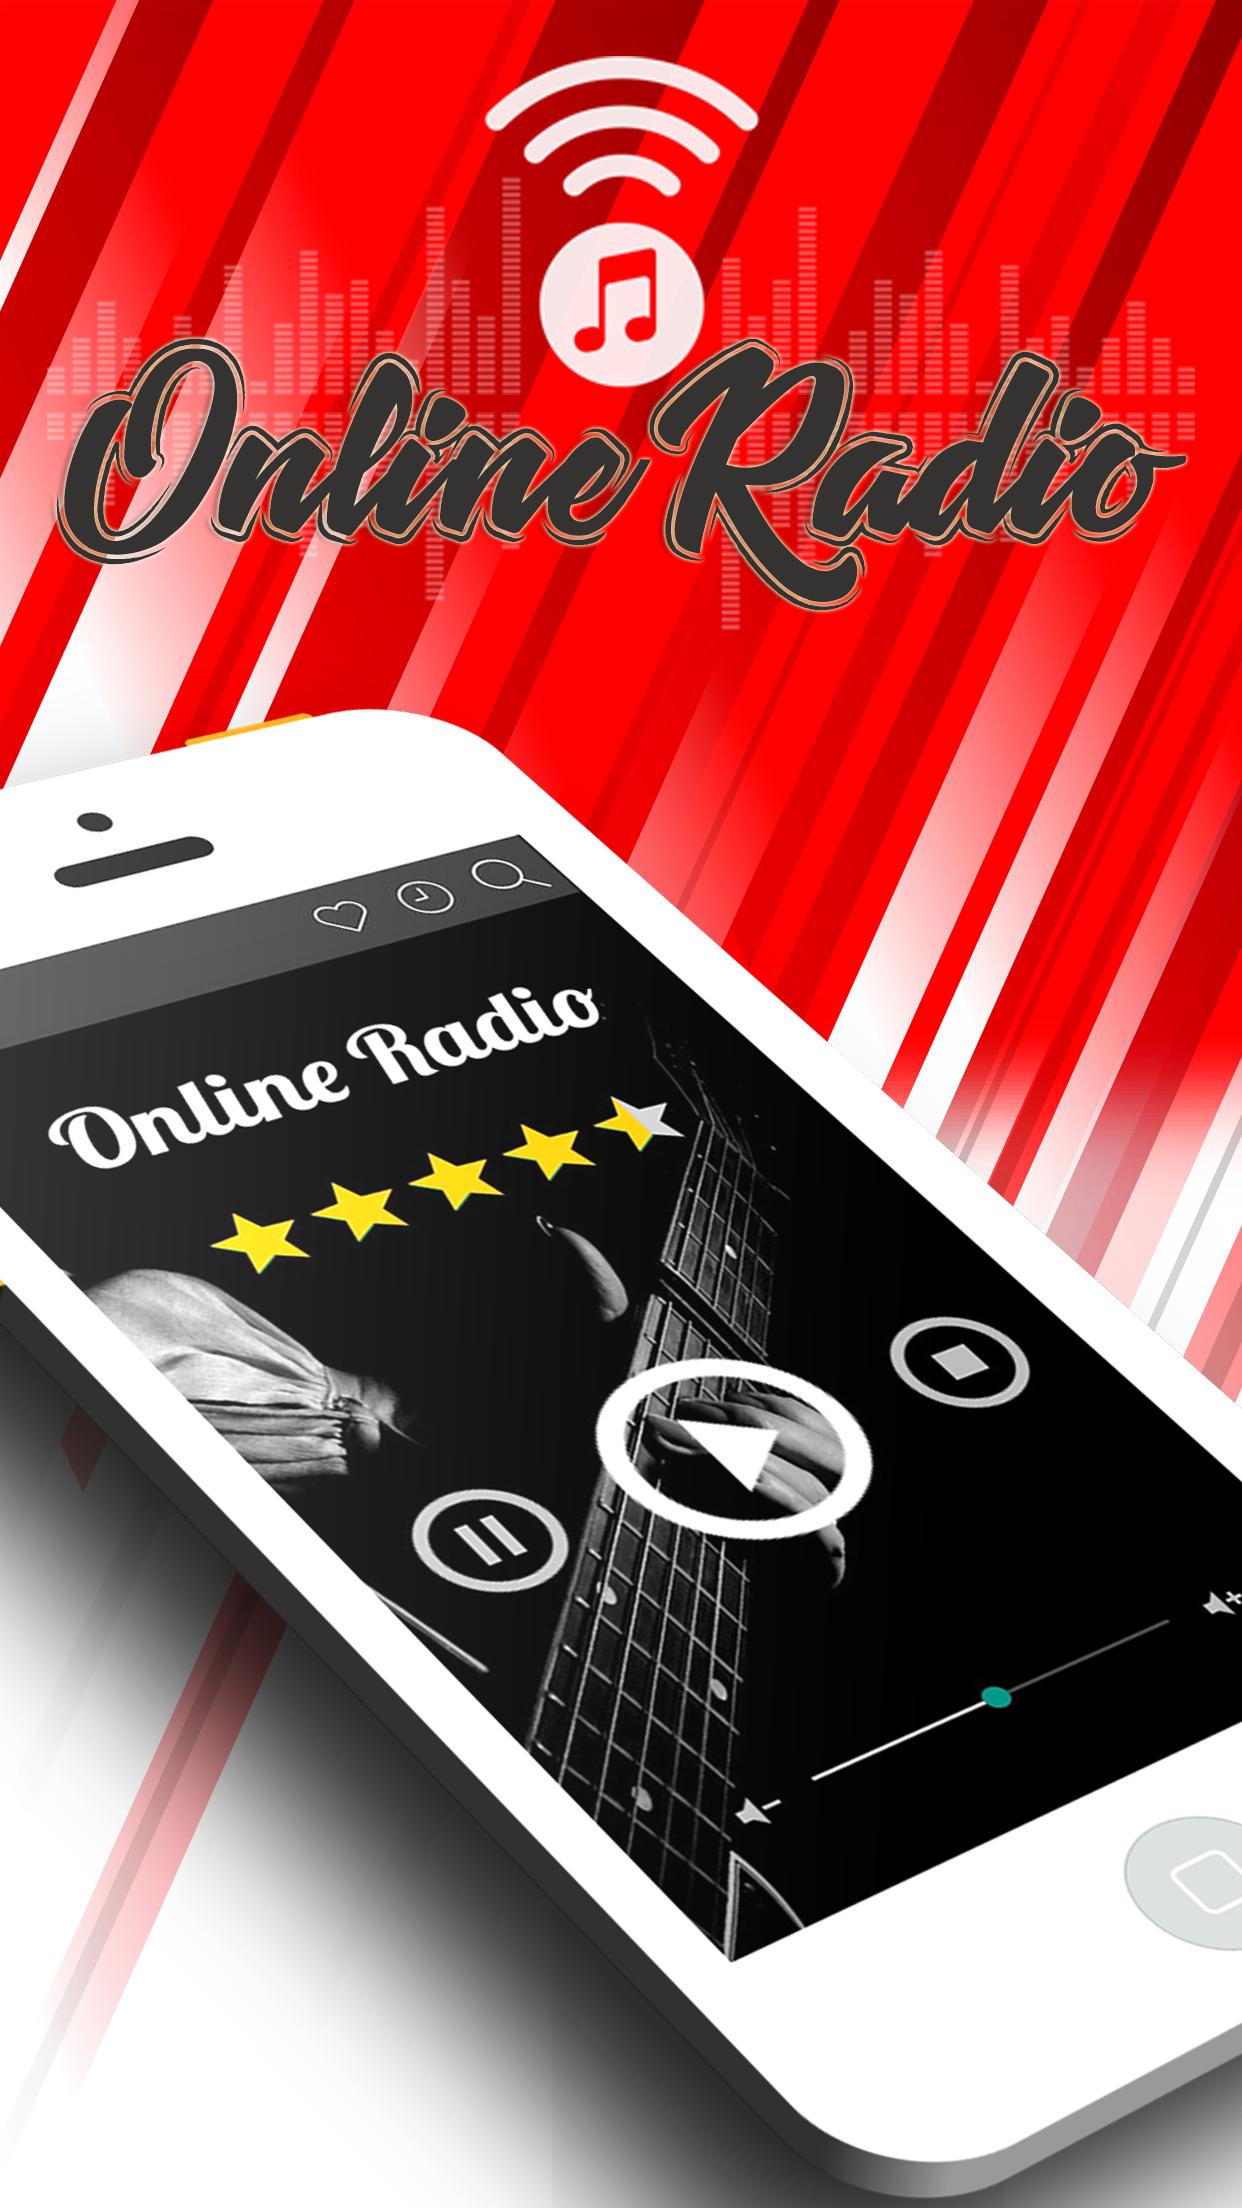 Radio 987 FM for Android - APK Download